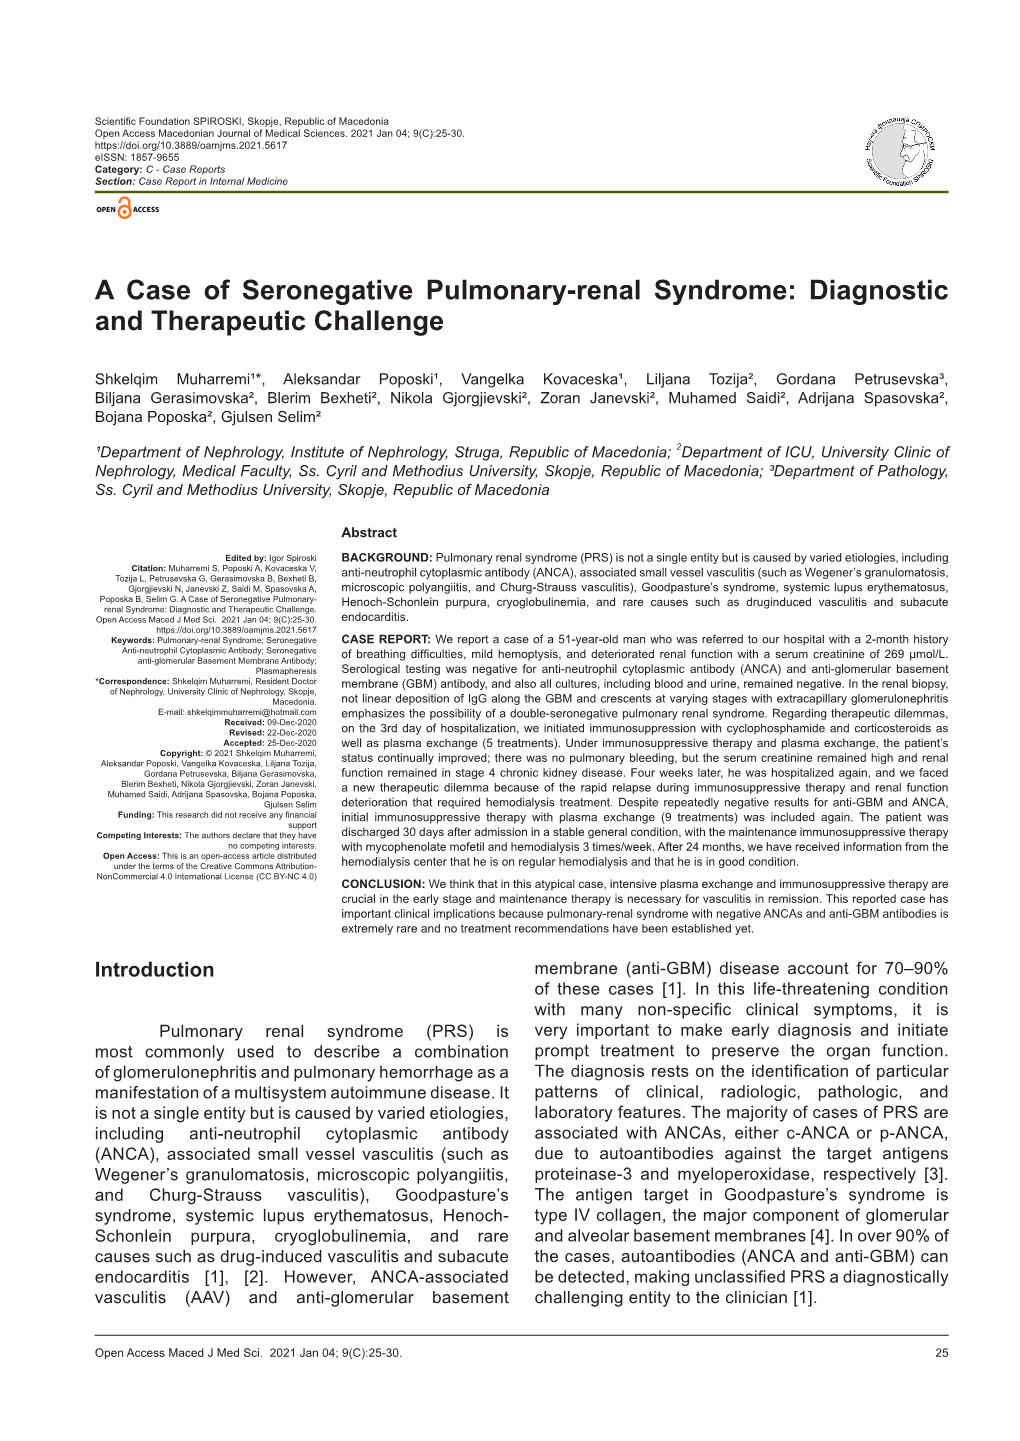 A Case of Seronegative Pulmonary-Renal Syndrome: Diagnostic and Therapeutic Challenge